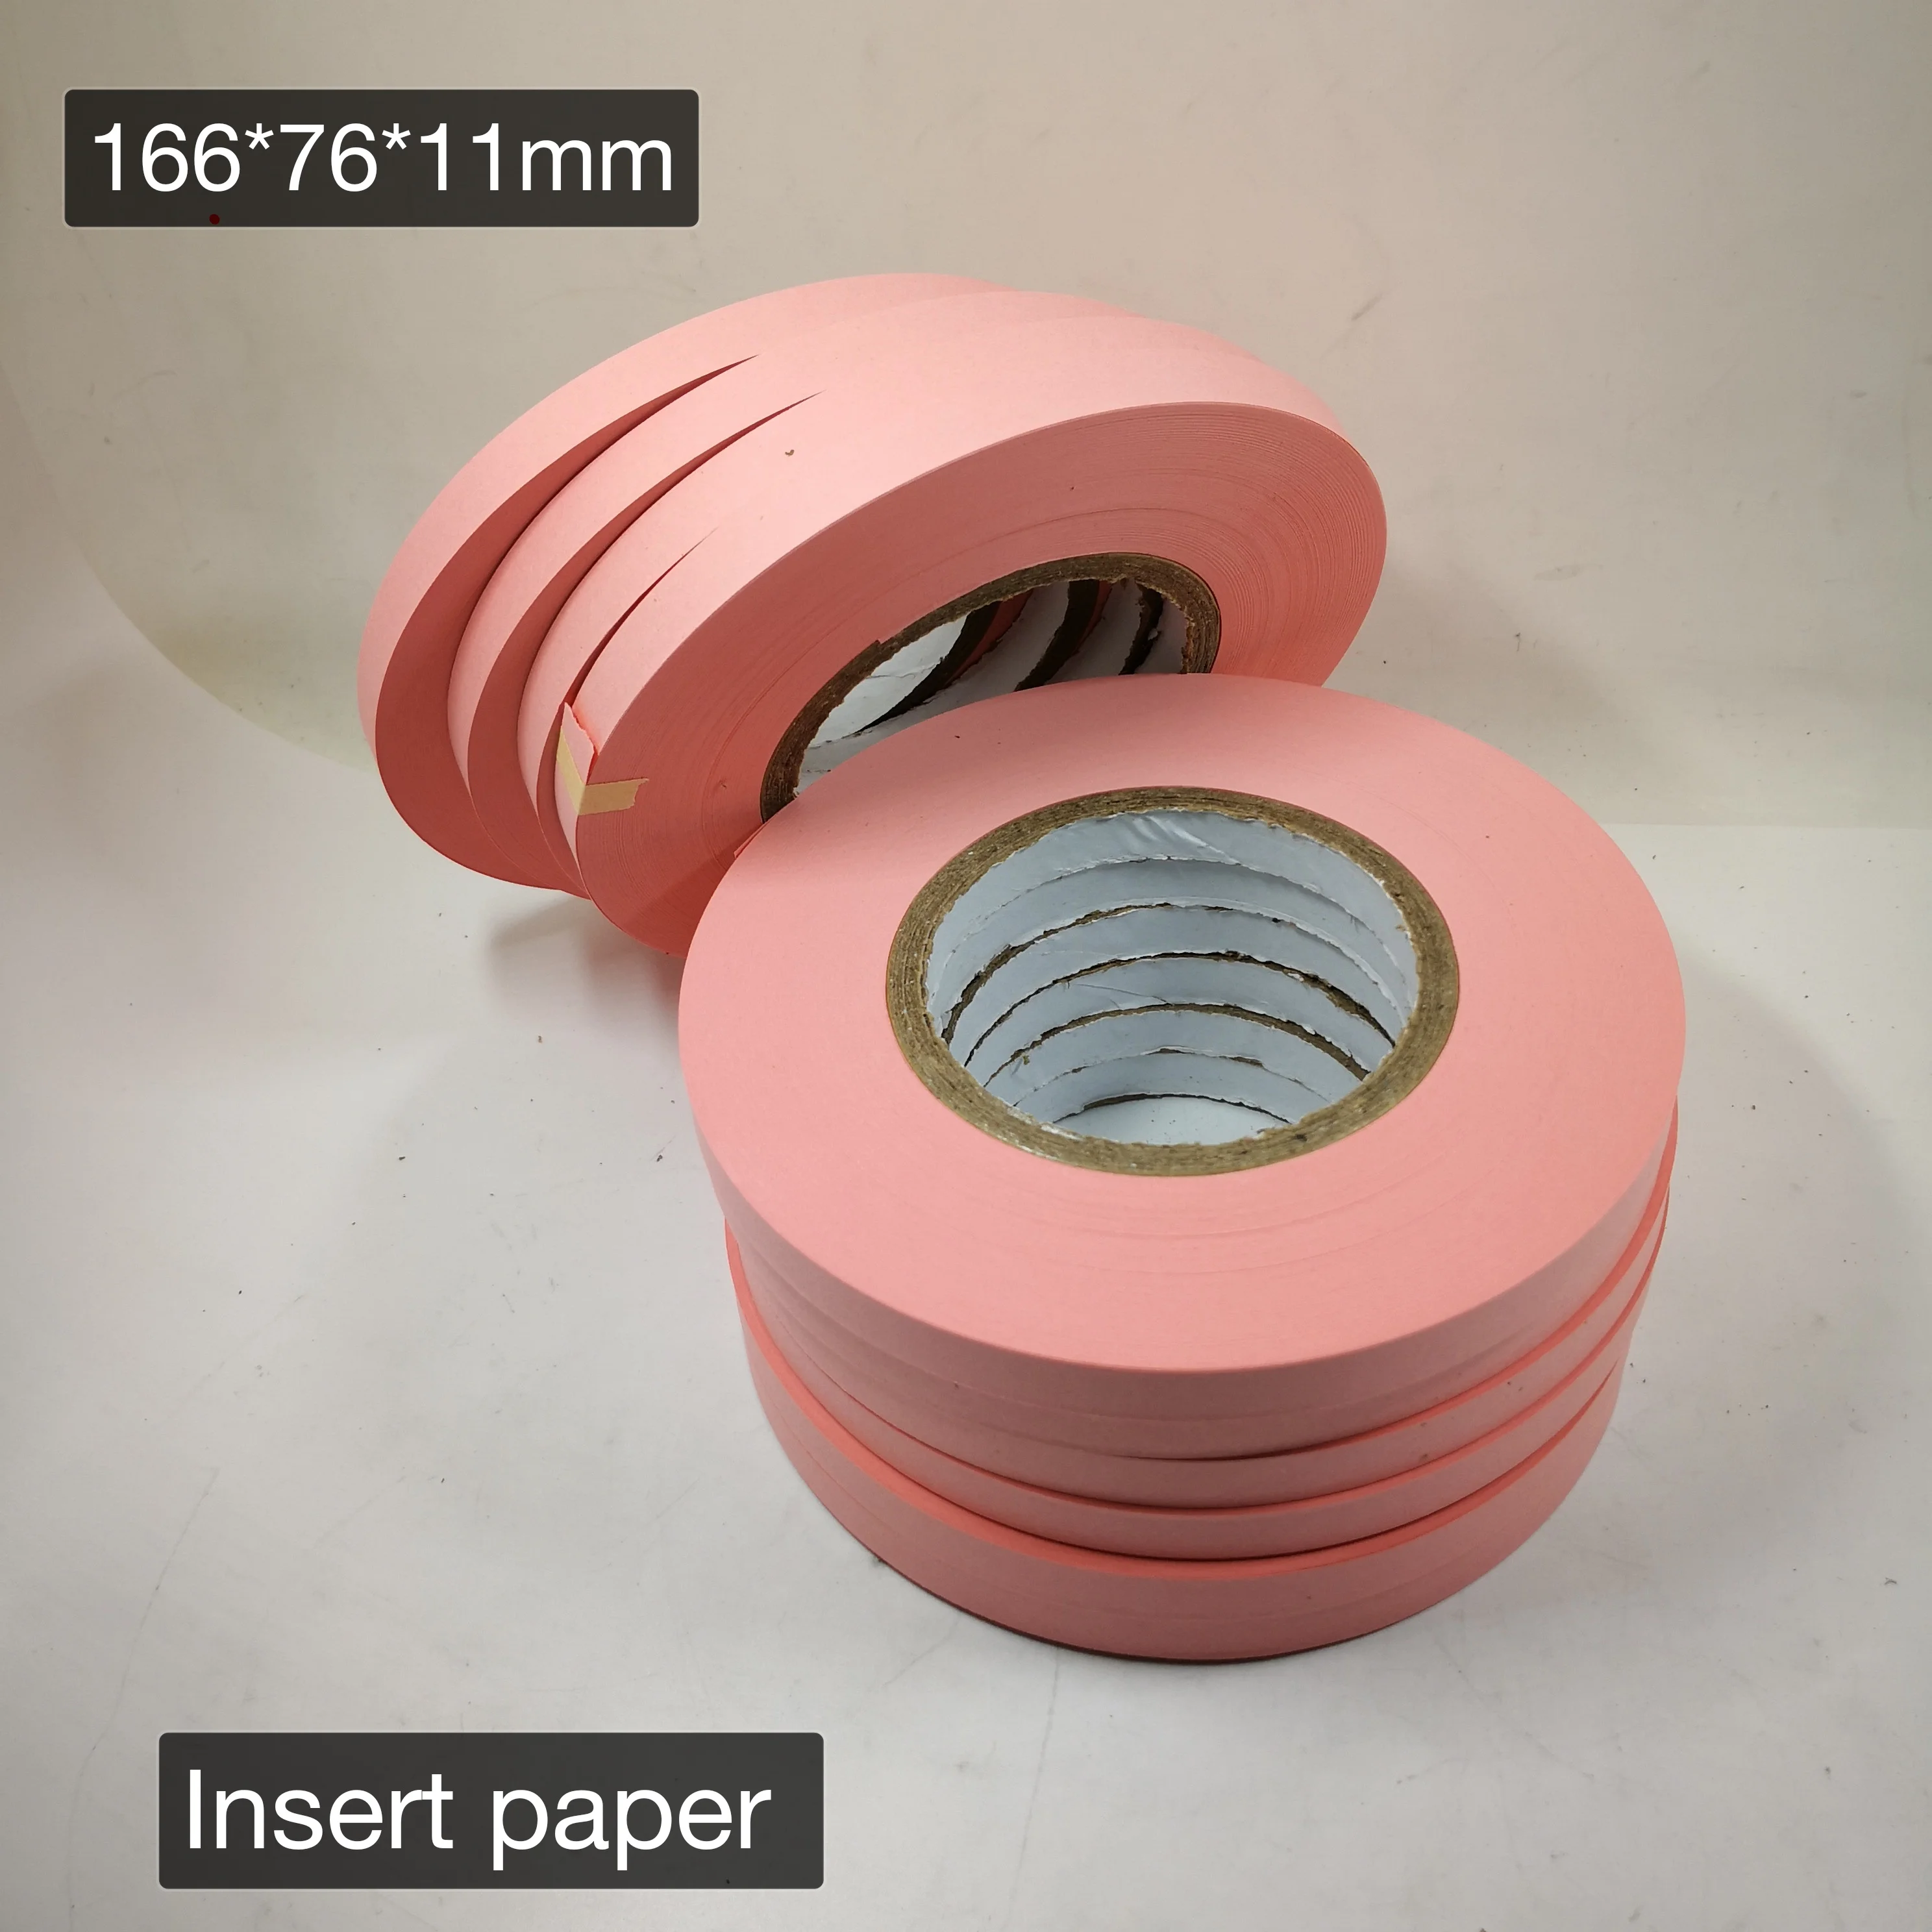 Inserter paper for The MTI Mini Tab Inserter  counting machine (ONLY paper no machine)TPMS